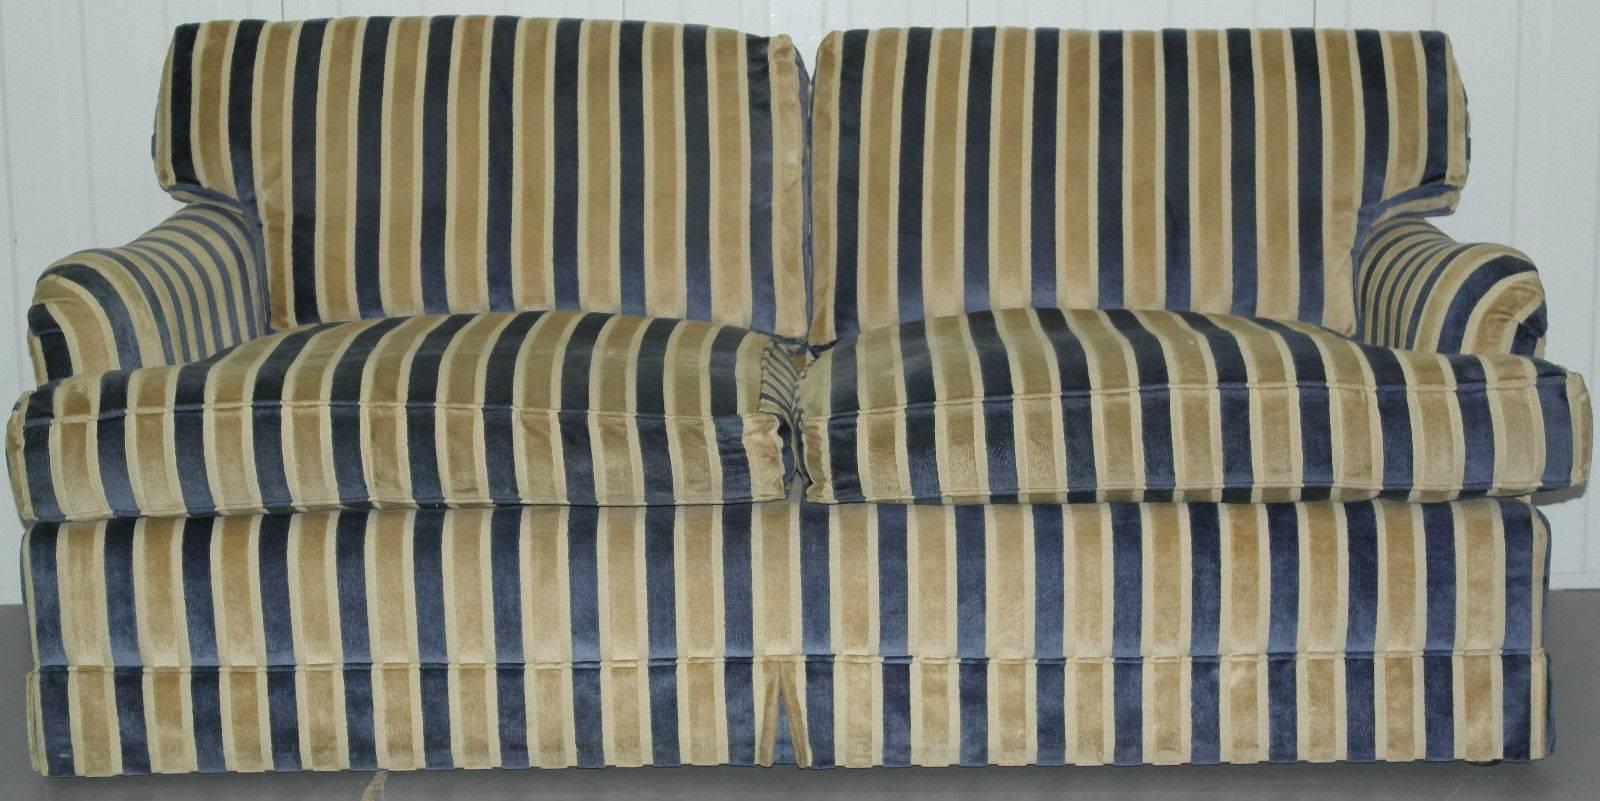 Antique and vintage furniture, we are delighted to offer for sale one of four stunning Howard style velvet striped club sofas RRP £1200

This one is a 2.5 seater grand, we have a pair of this size and a pair of standard 2 seaters, this auction is